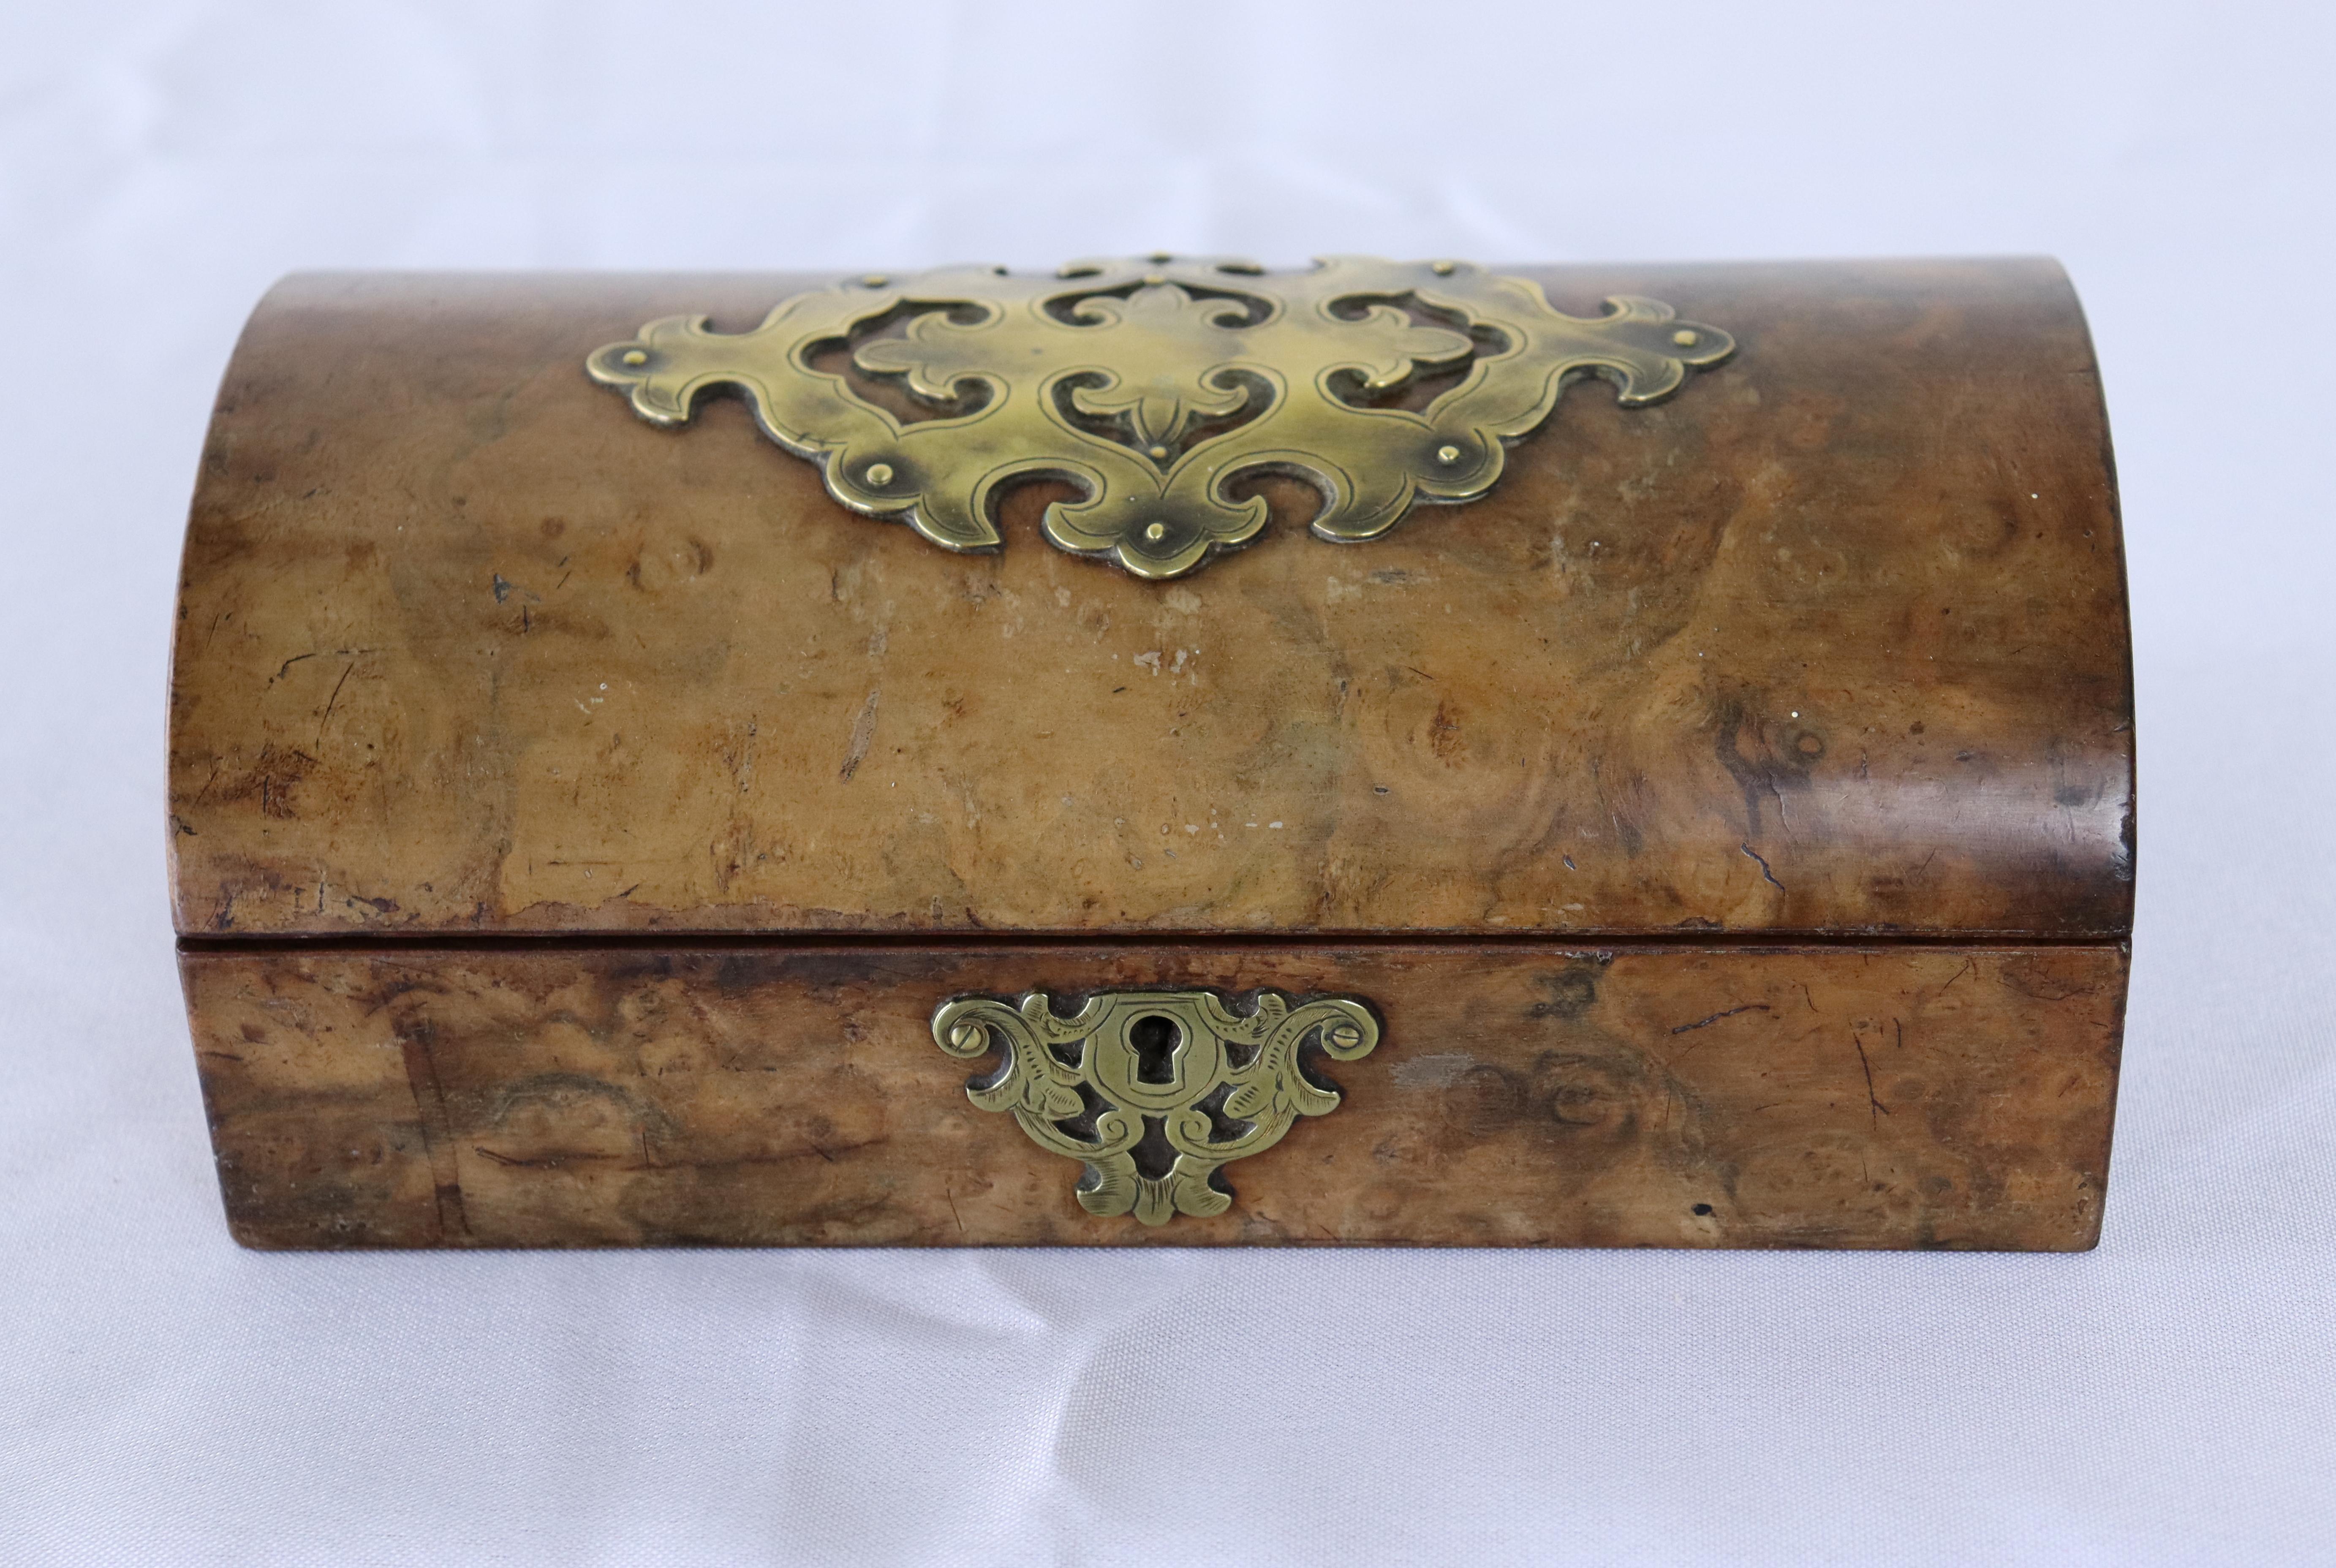 A dome shaped English jewelry box fashioned out of burr walnut.  The brass decoration is in very good condition.